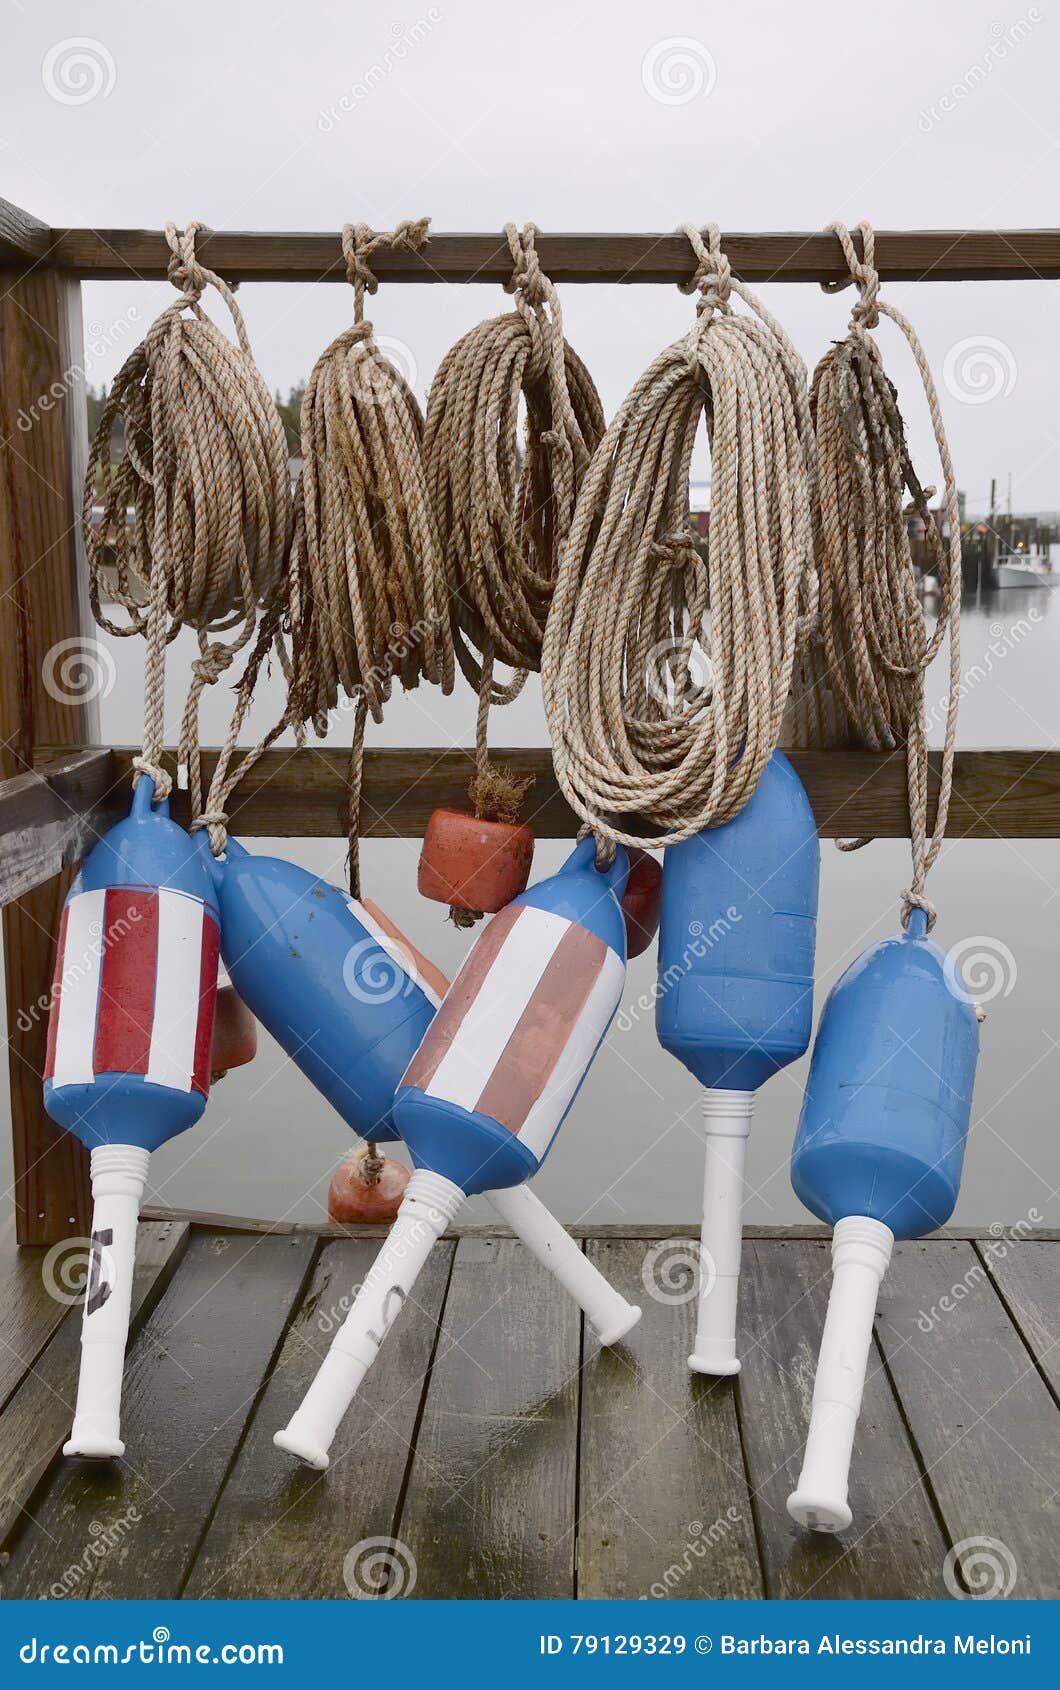 Lobster buoy and ropes stock image. Image of harbor, harbour